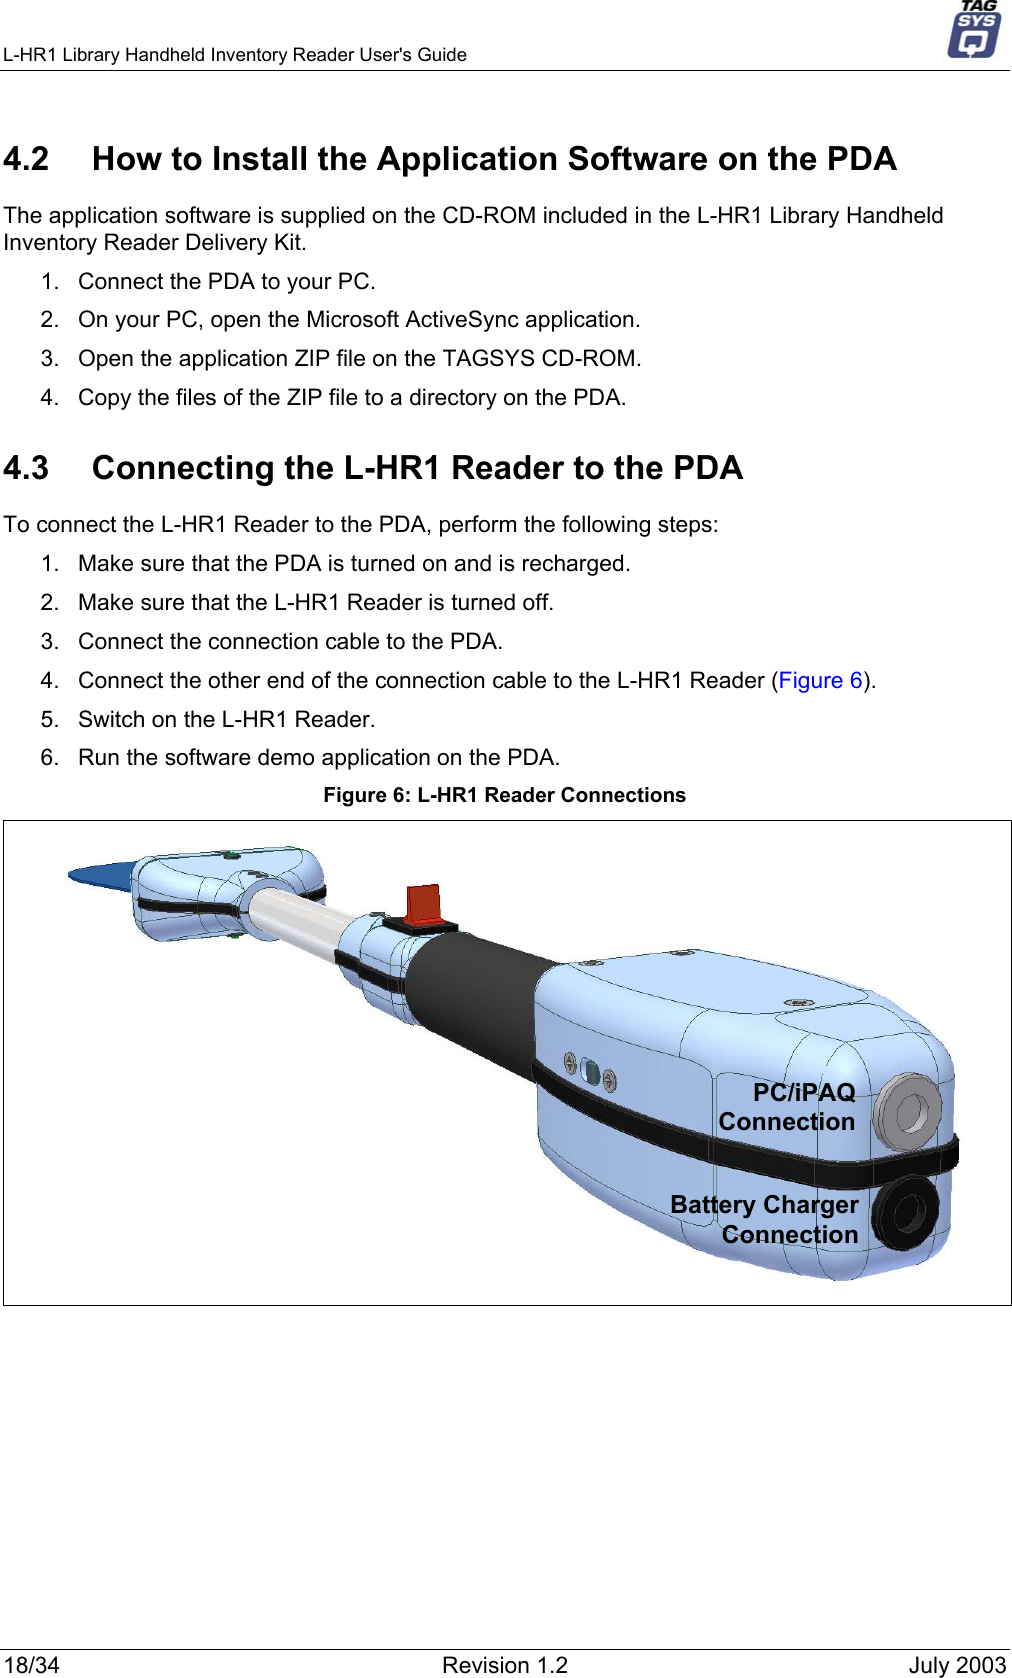 L-HR1 Library Handheld Inventory Reader User&apos;s Guide     4.2  How to Install the Application Software on the PDA The application software is supplied on the CD-ROM included in the L-HR1 Library Handheld Inventory Reader Delivery Kit.  1.  Connect the PDA to your PC. 2.  On your PC, open the Microsoft ActiveSync application. 3.  Open the application ZIP file on the TAGSYS CD-ROM.  4.  Copy the files of the ZIP file to a directory on the PDA. 4.3  Connecting the L-HR1 Reader to the PDA To connect the L-HR1 Reader to the PDA, perform the following steps: 1.  Make sure that the PDA is turned on and is recharged. 2.  Make sure that the L-HR1 Reader is turned off. 3.  Connect the connection cable to the PDA. 4.  Connect the other end of the connection cable to the L-HR1 Reader (Figure 6). 5.  Switch on the L-HR1 Reader. 6.  Run the software demo application on the PDA. Figure 6: L-HR1 Reader Connections  PC/iPAQConnectionBattery ChargerConnection 18/34  Revision 1.2  July 2003 